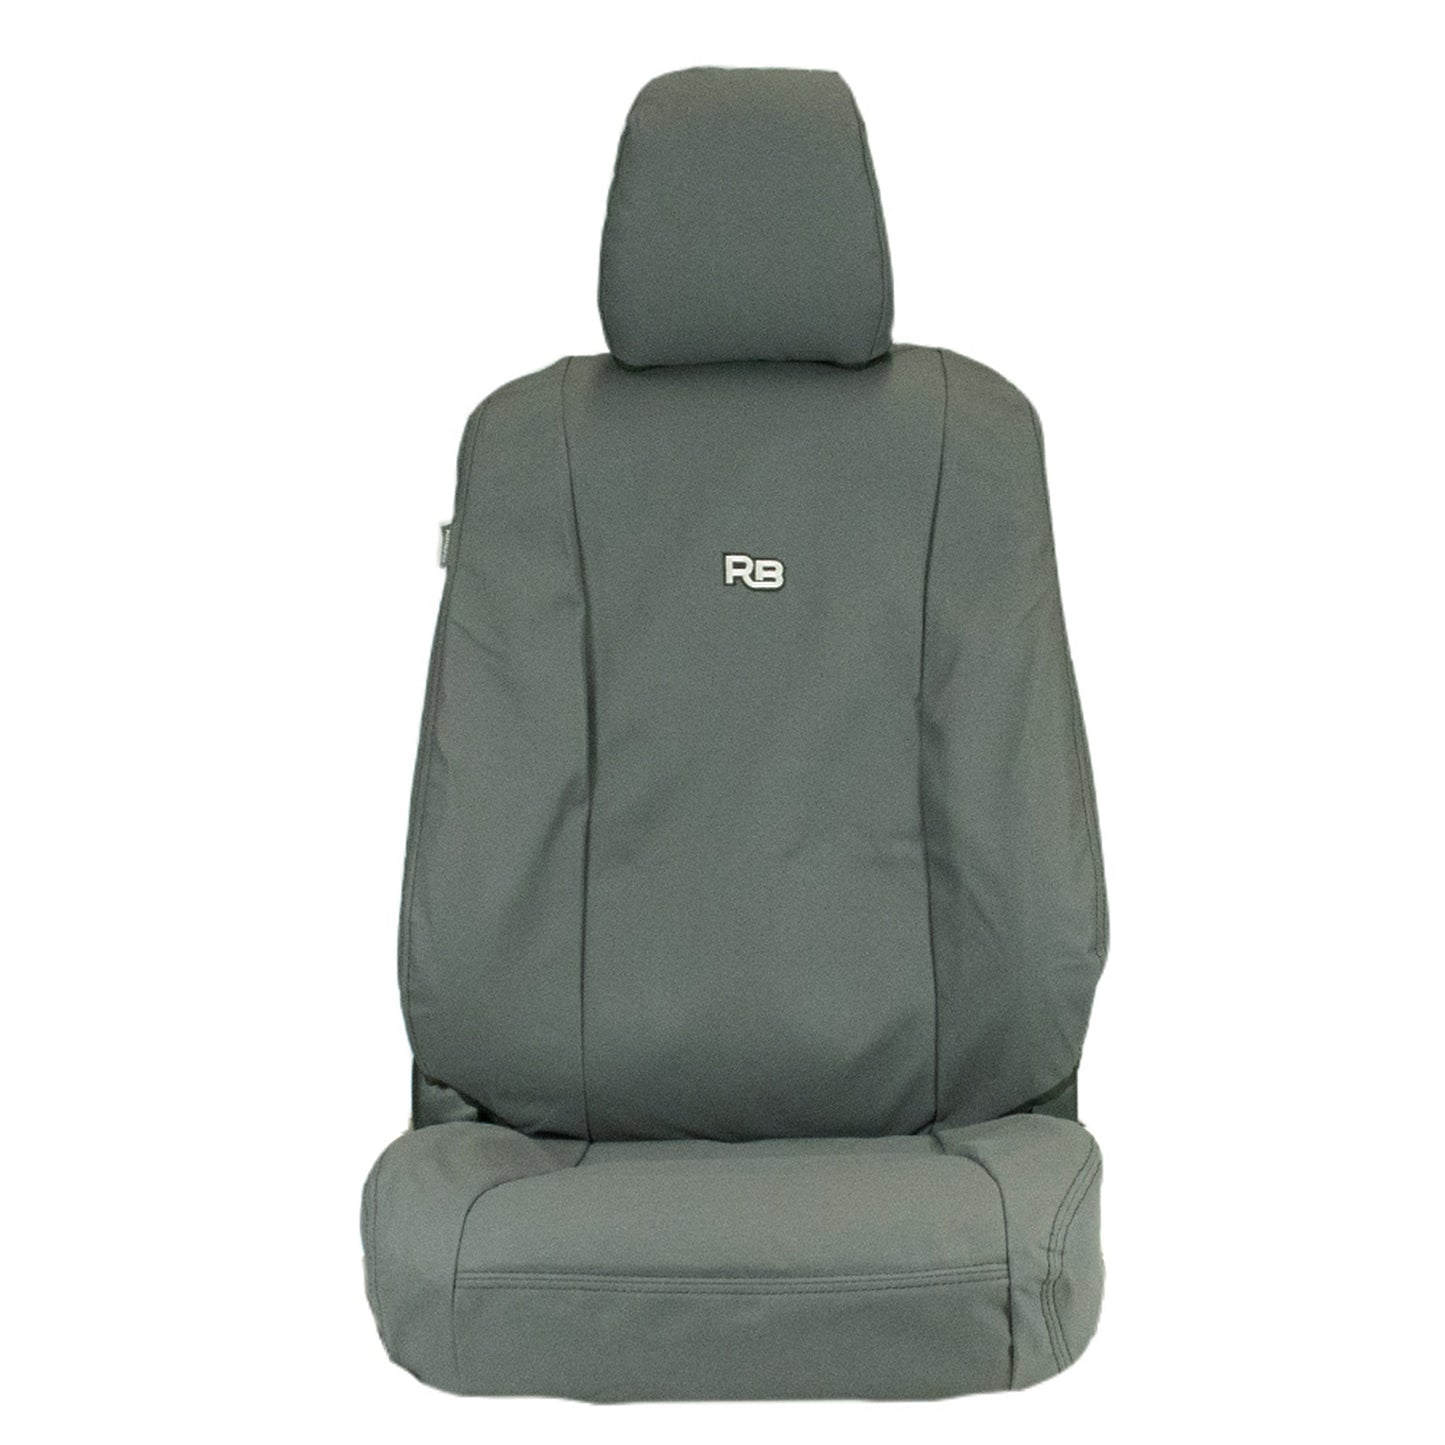 Razorback 4x4 XP7 Heavy Duty Canvas Front Seat Covers For a Toyota HiLux 8th Gen SR (Sep 2015 - Current)